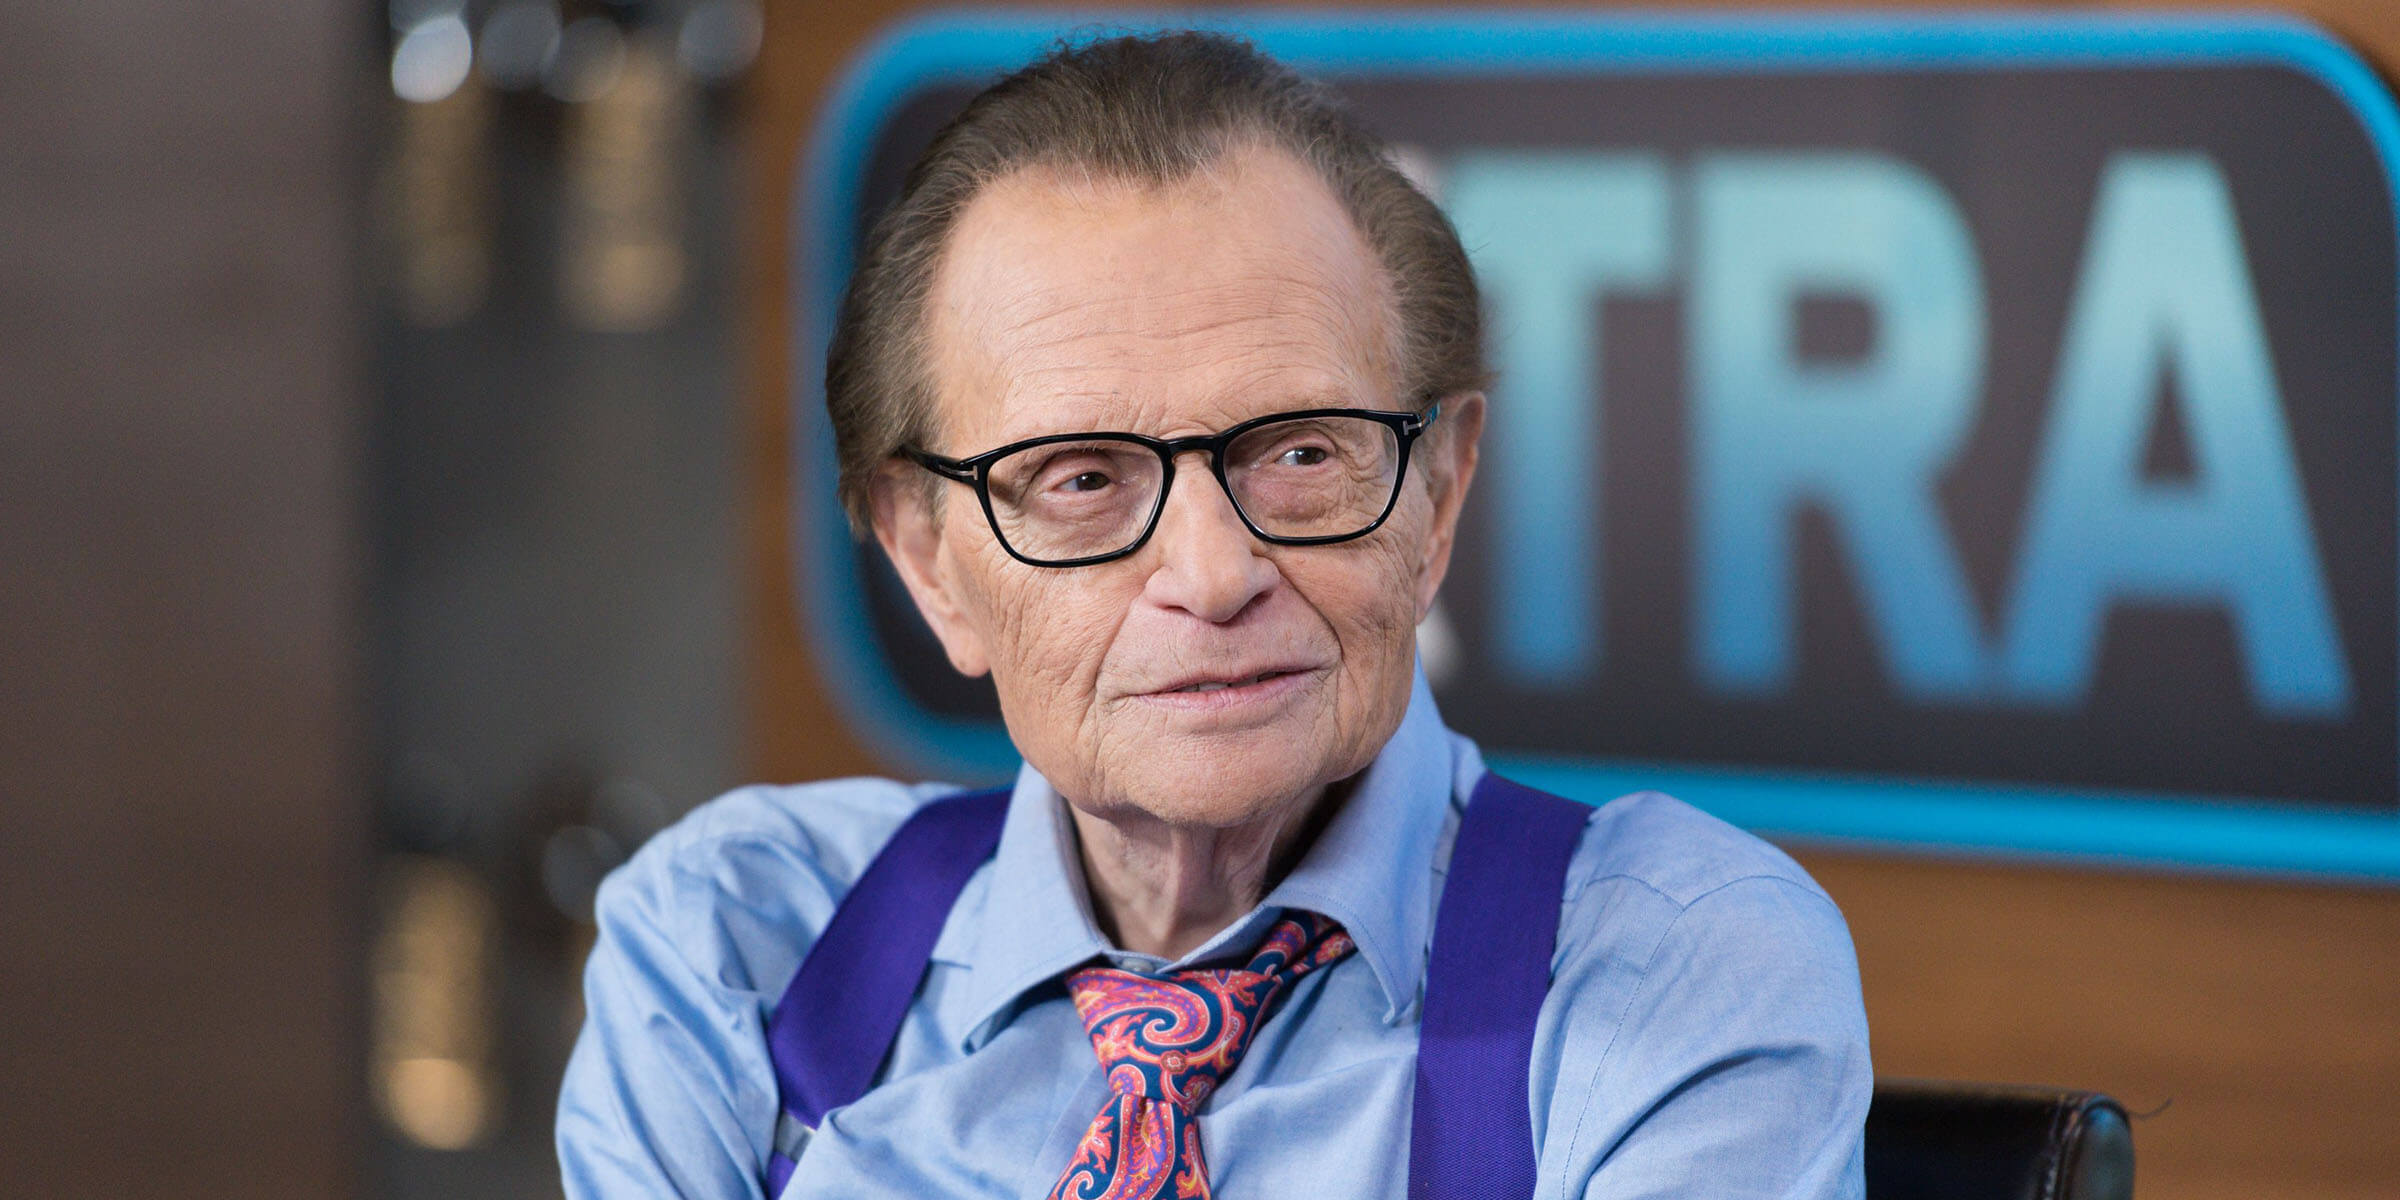 Larry King - 10 famous people who died of COVID-19 complications